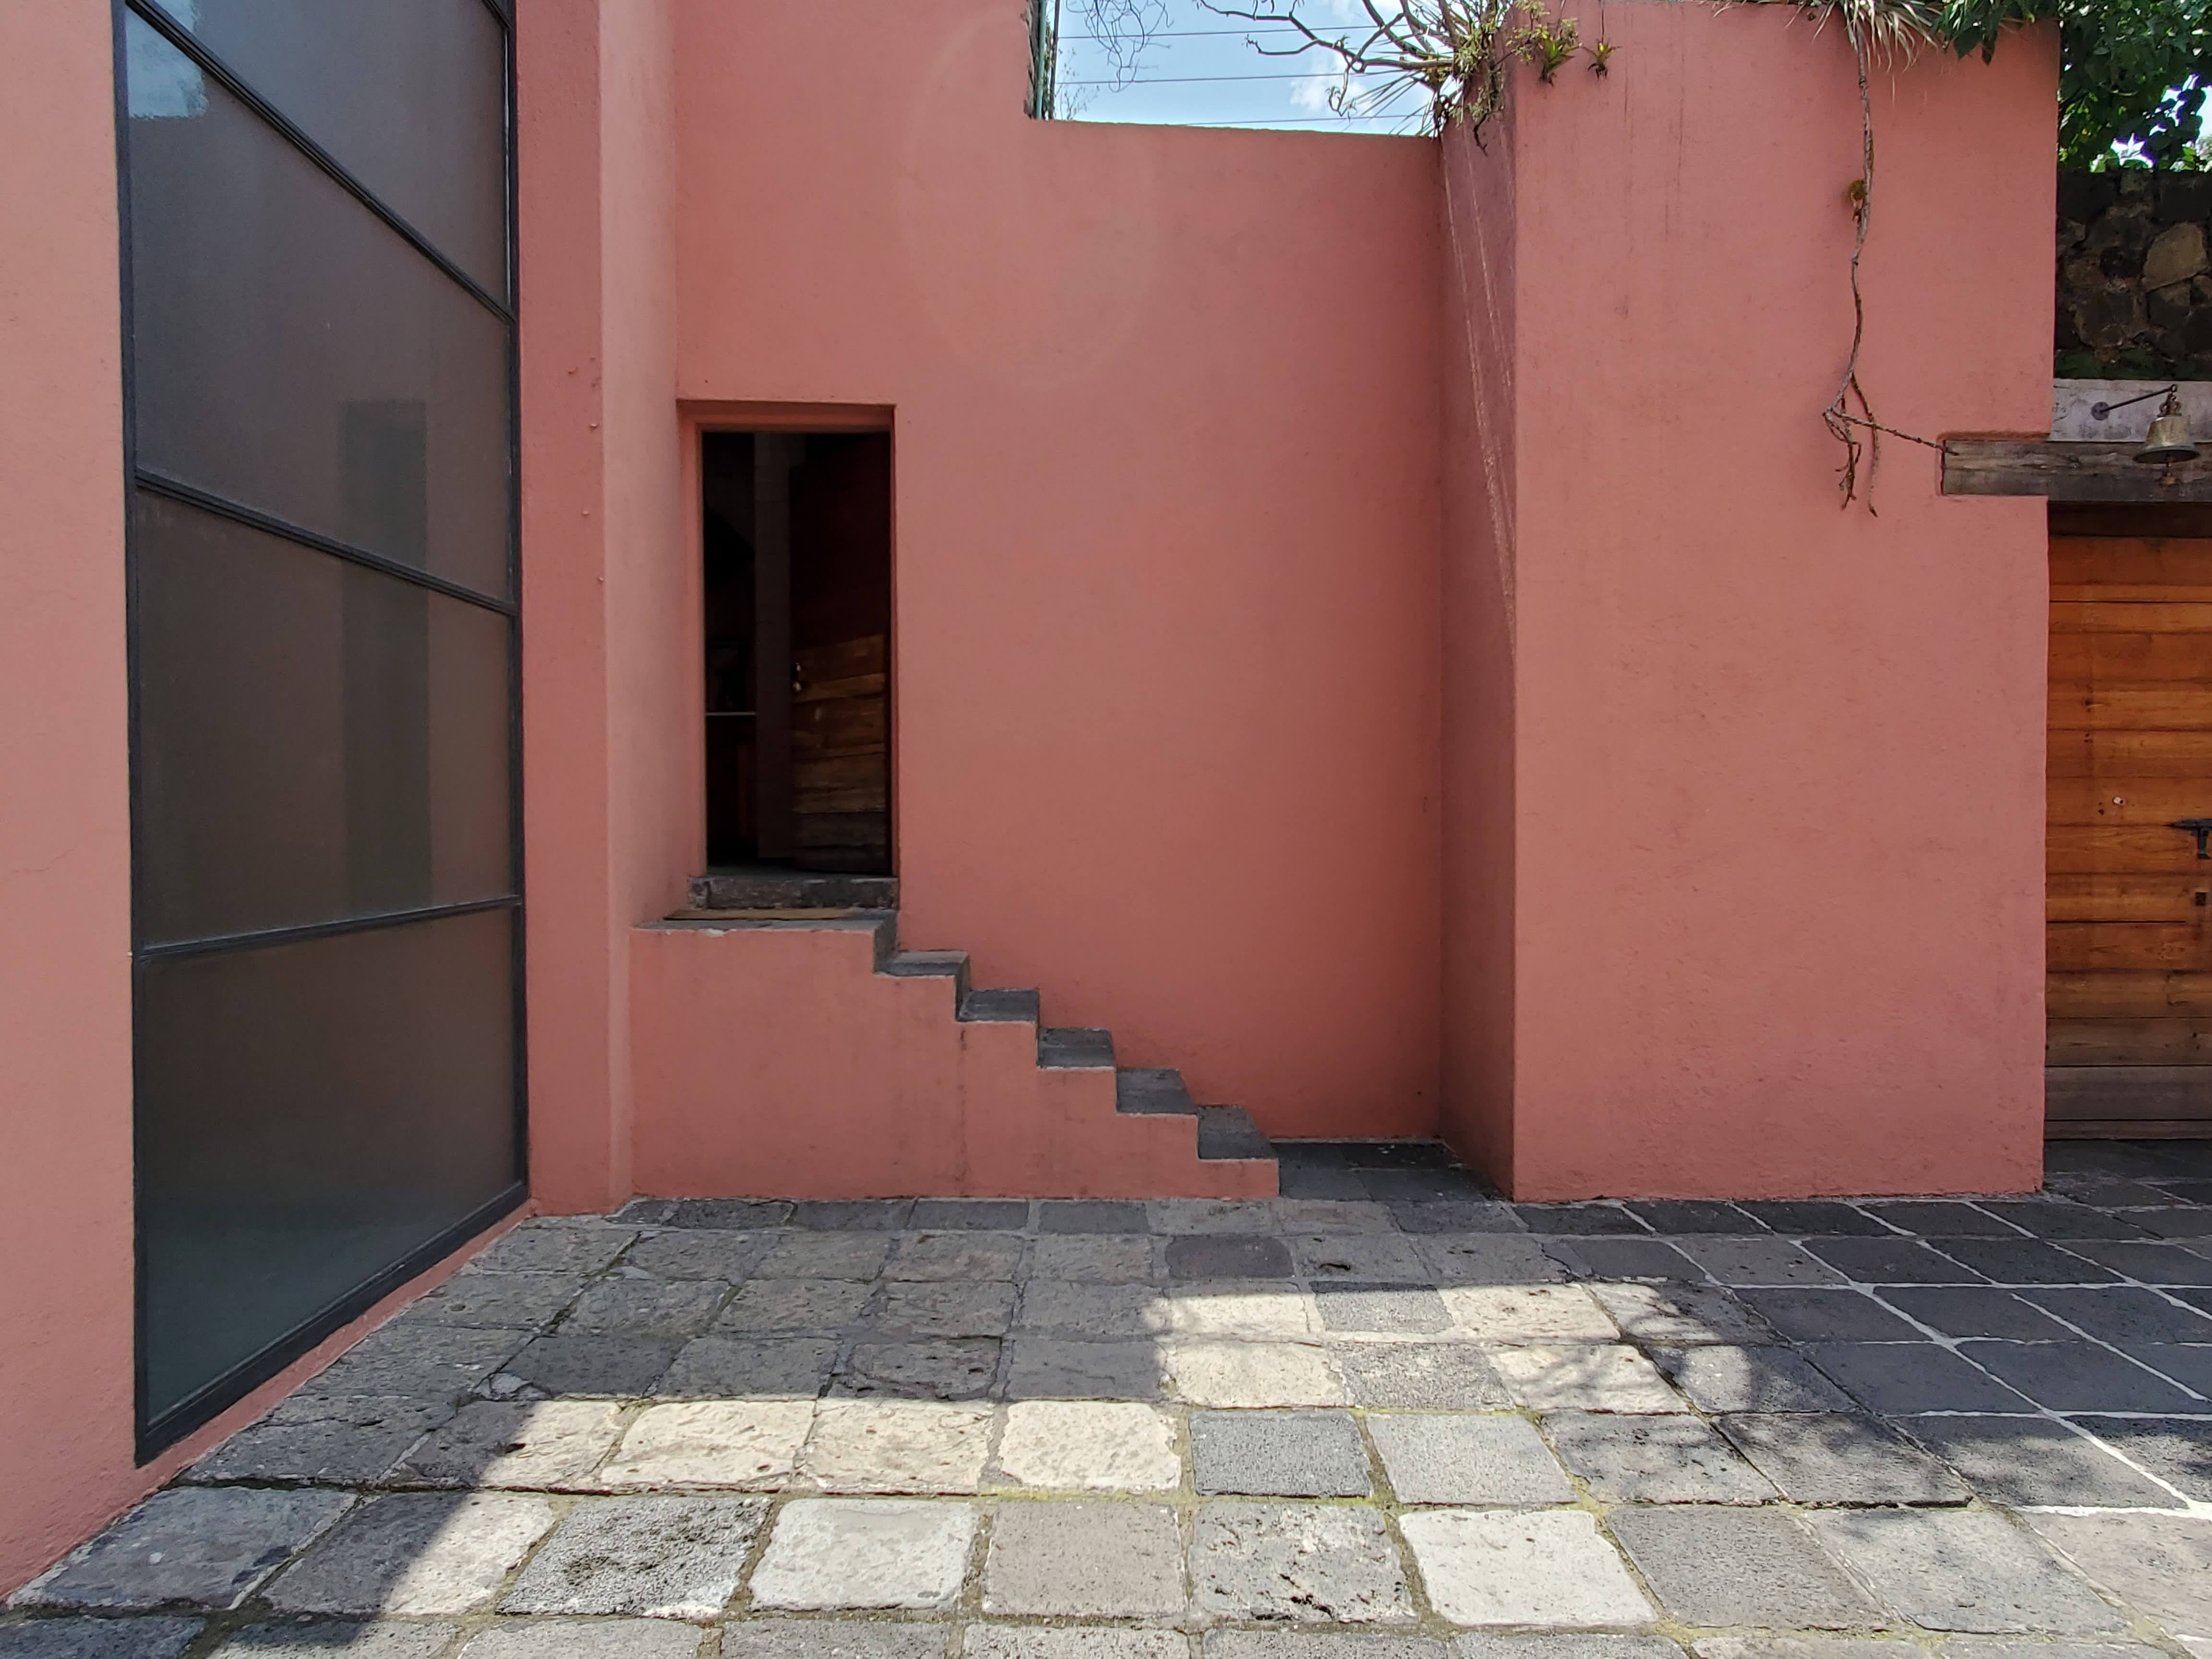 Pink exterior at casa pedegral in mexico city.